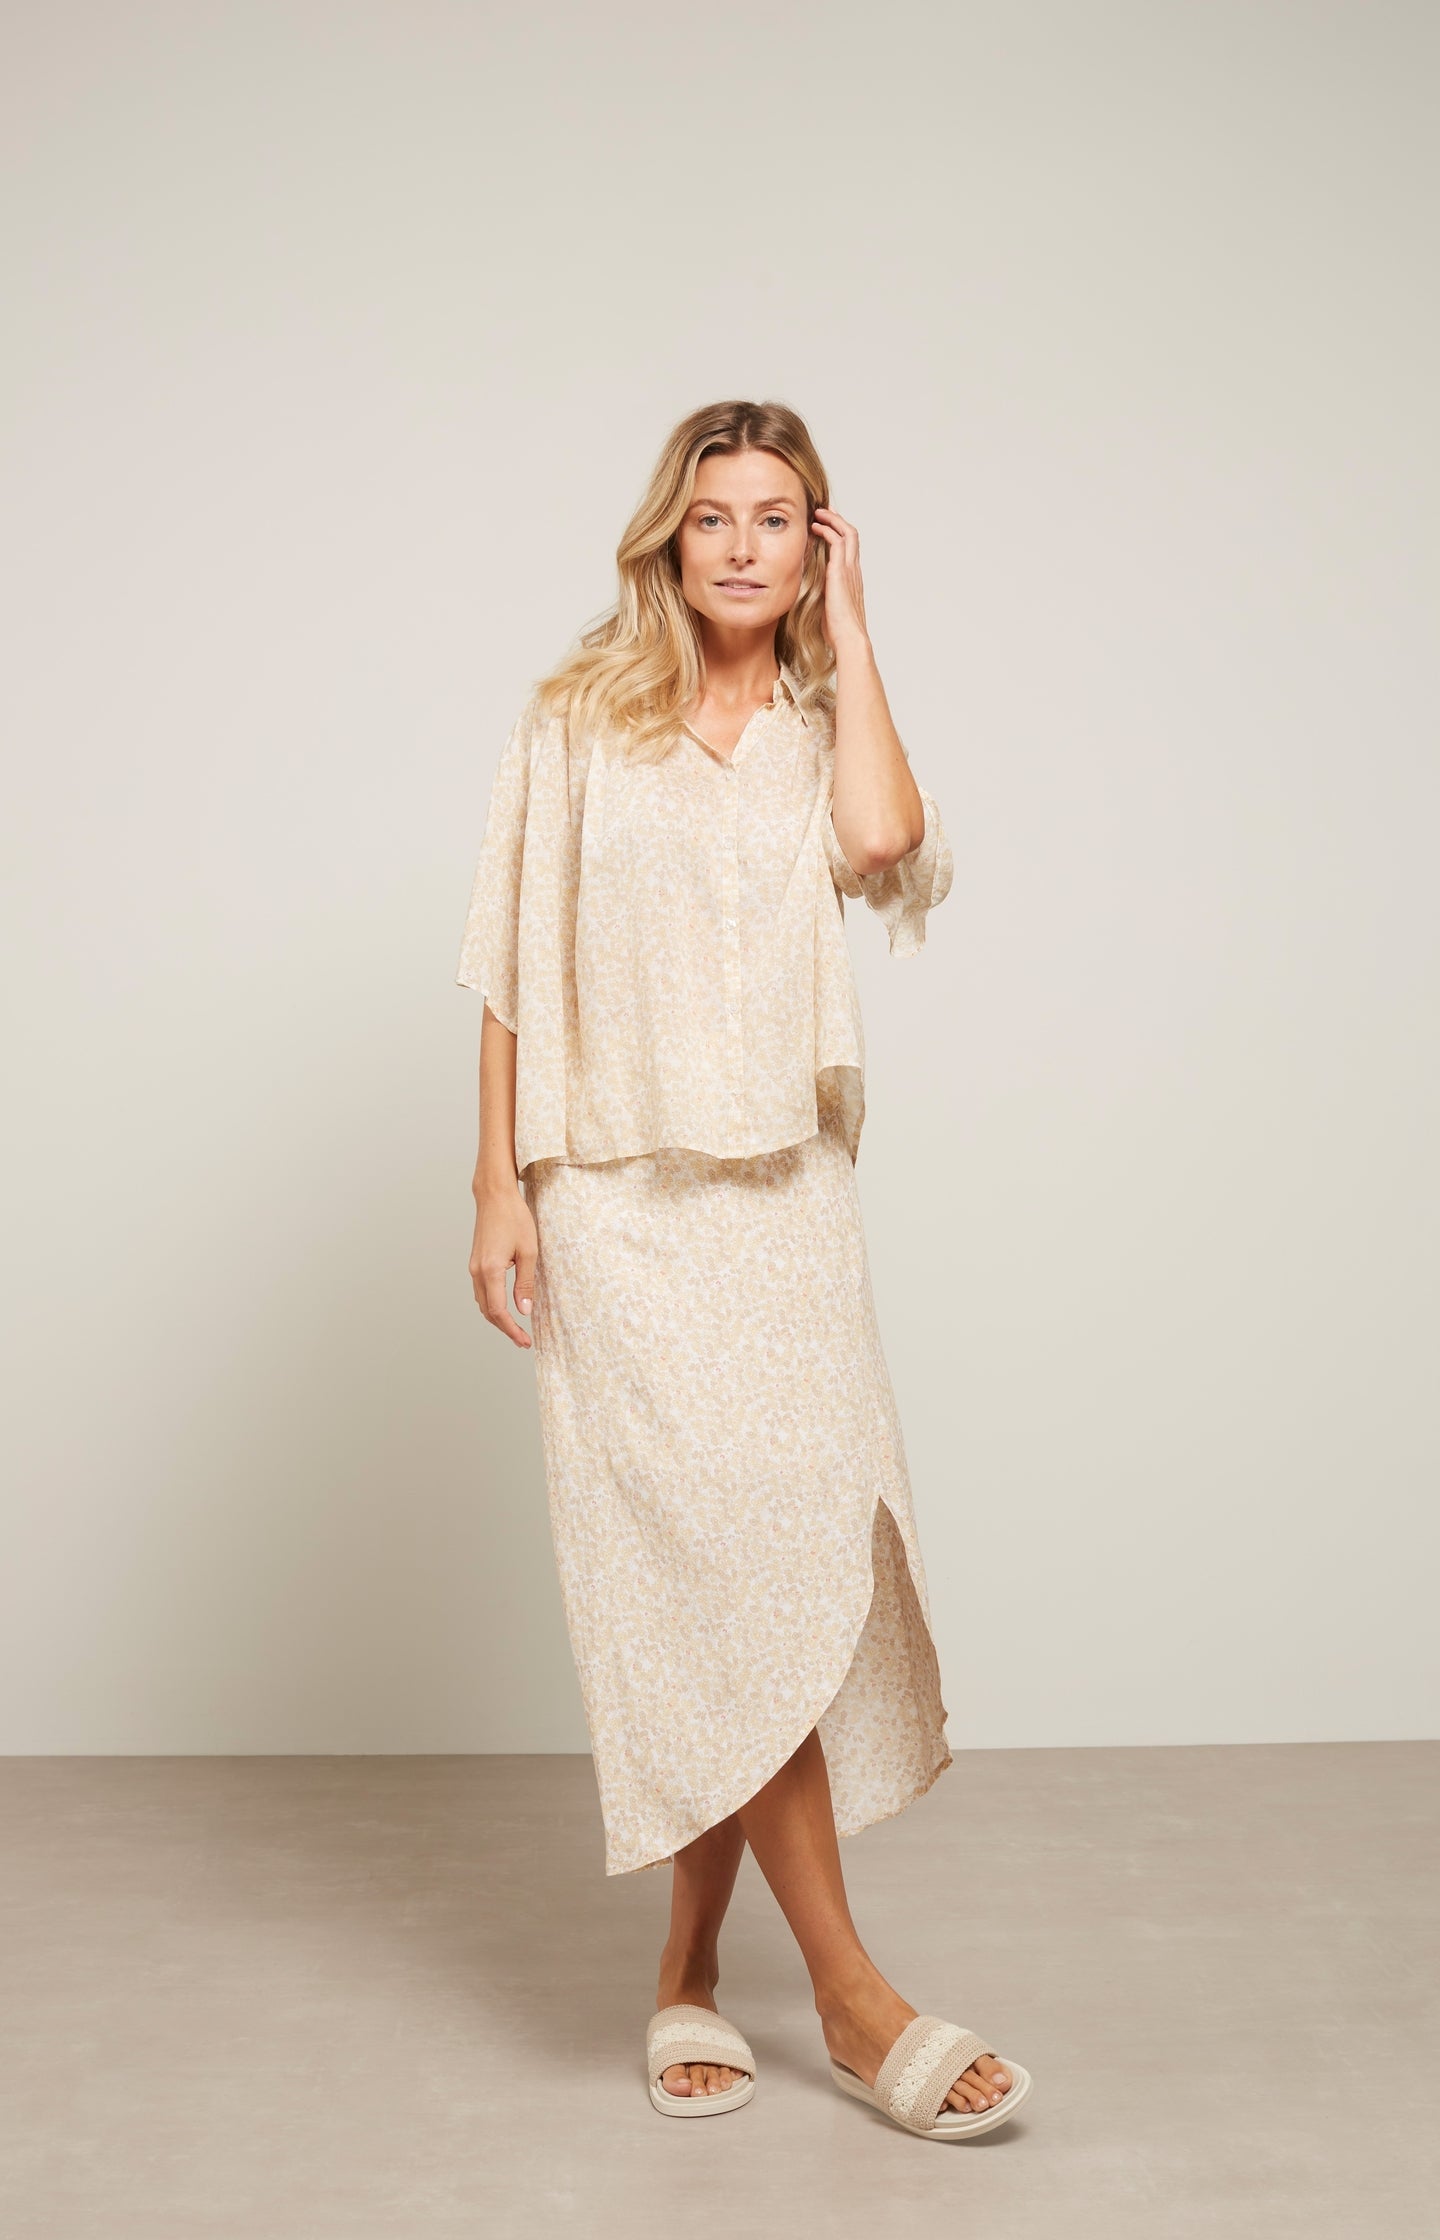 Oversized blouse with mid-length pleated and floral print